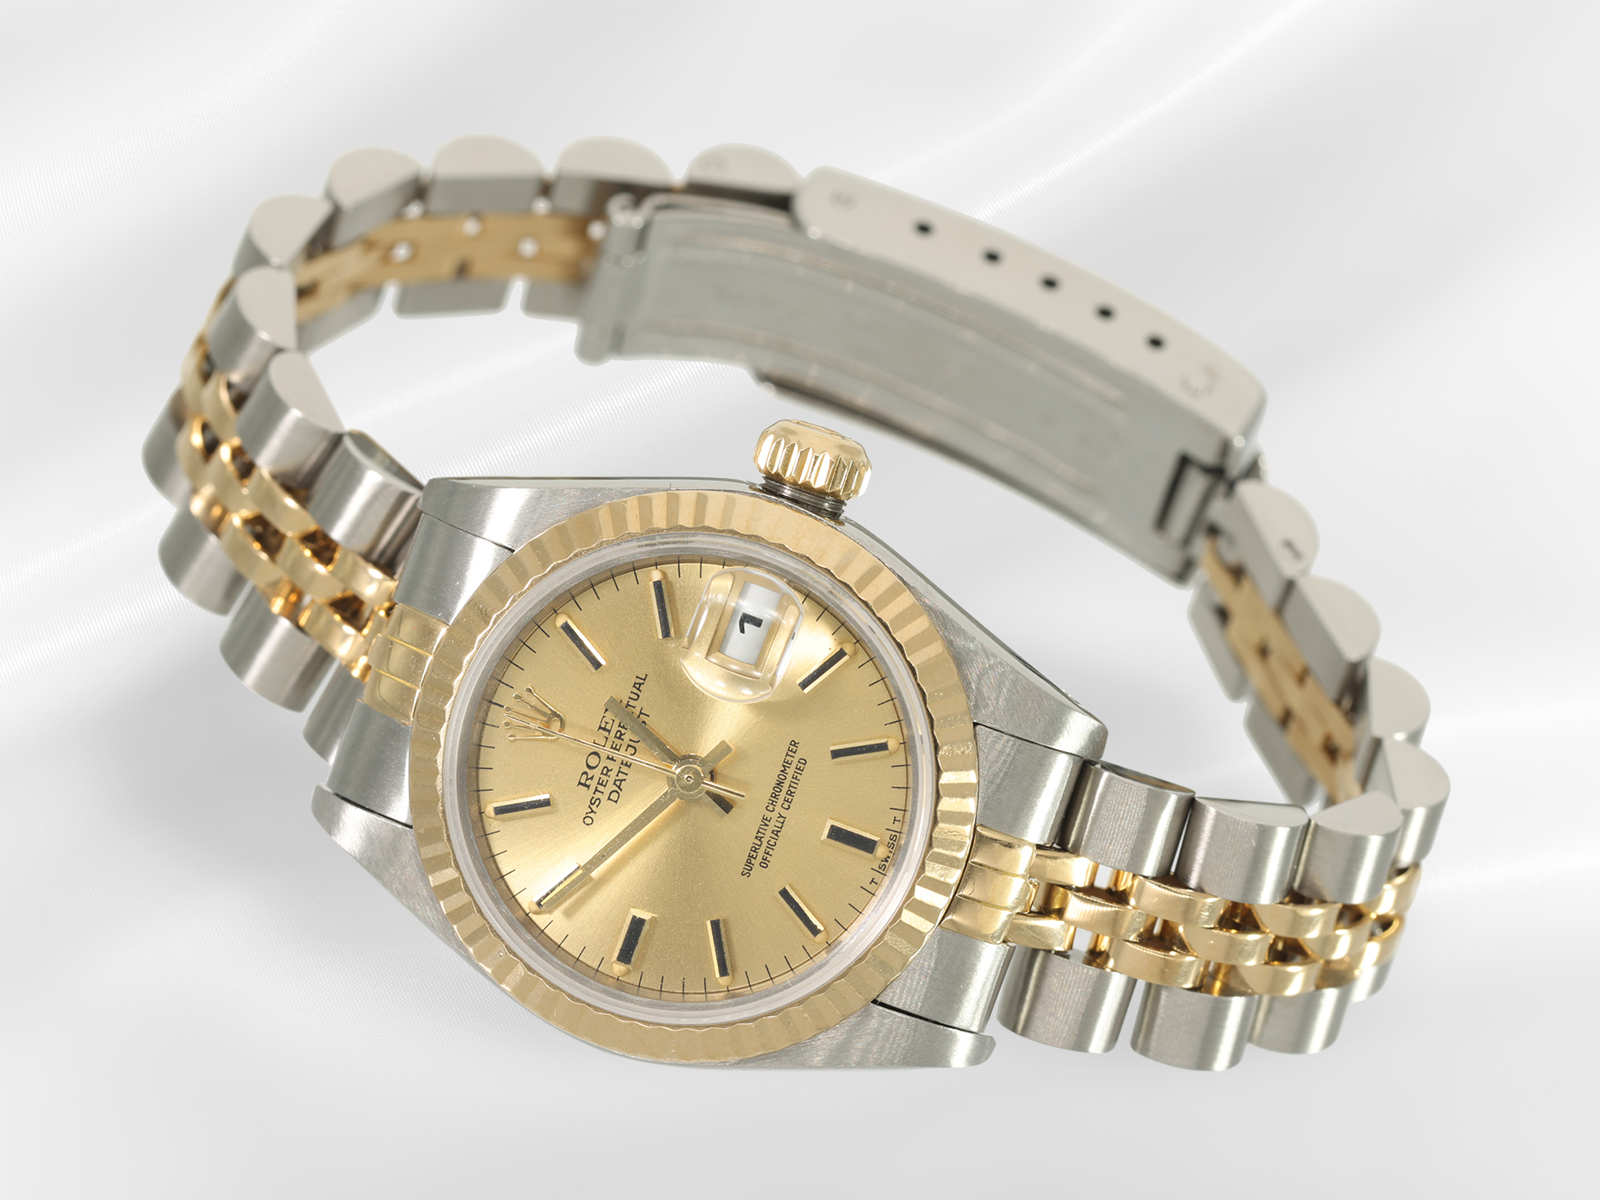 Wristwatch: Rolex Lady-Datejust Ref.69173 in steel/gold, year of manufacture 1987